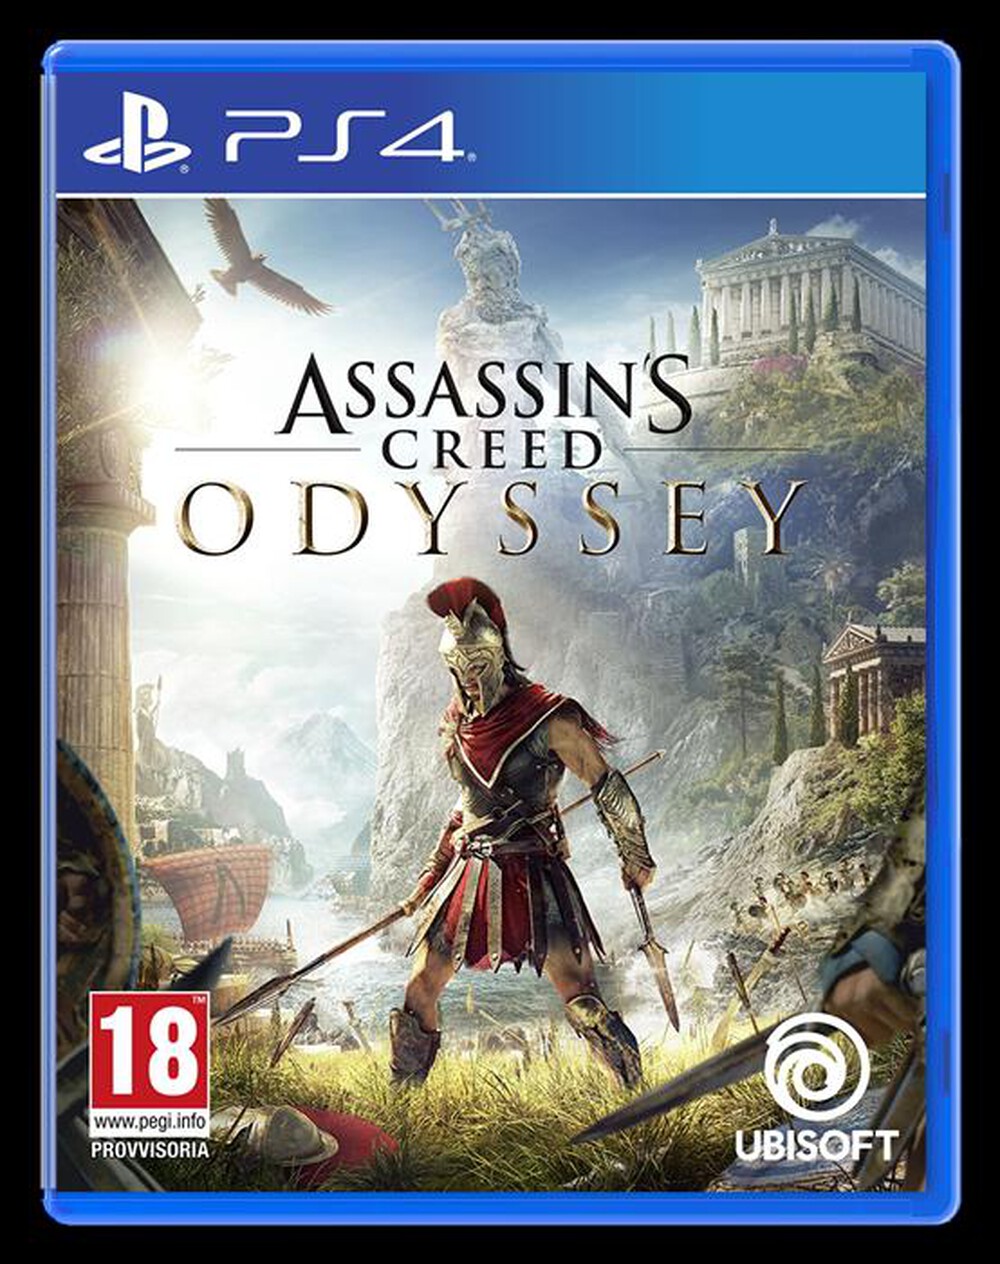 "UBISOFT - ASSASSIN'S CREED ODYSSEY  PS4"